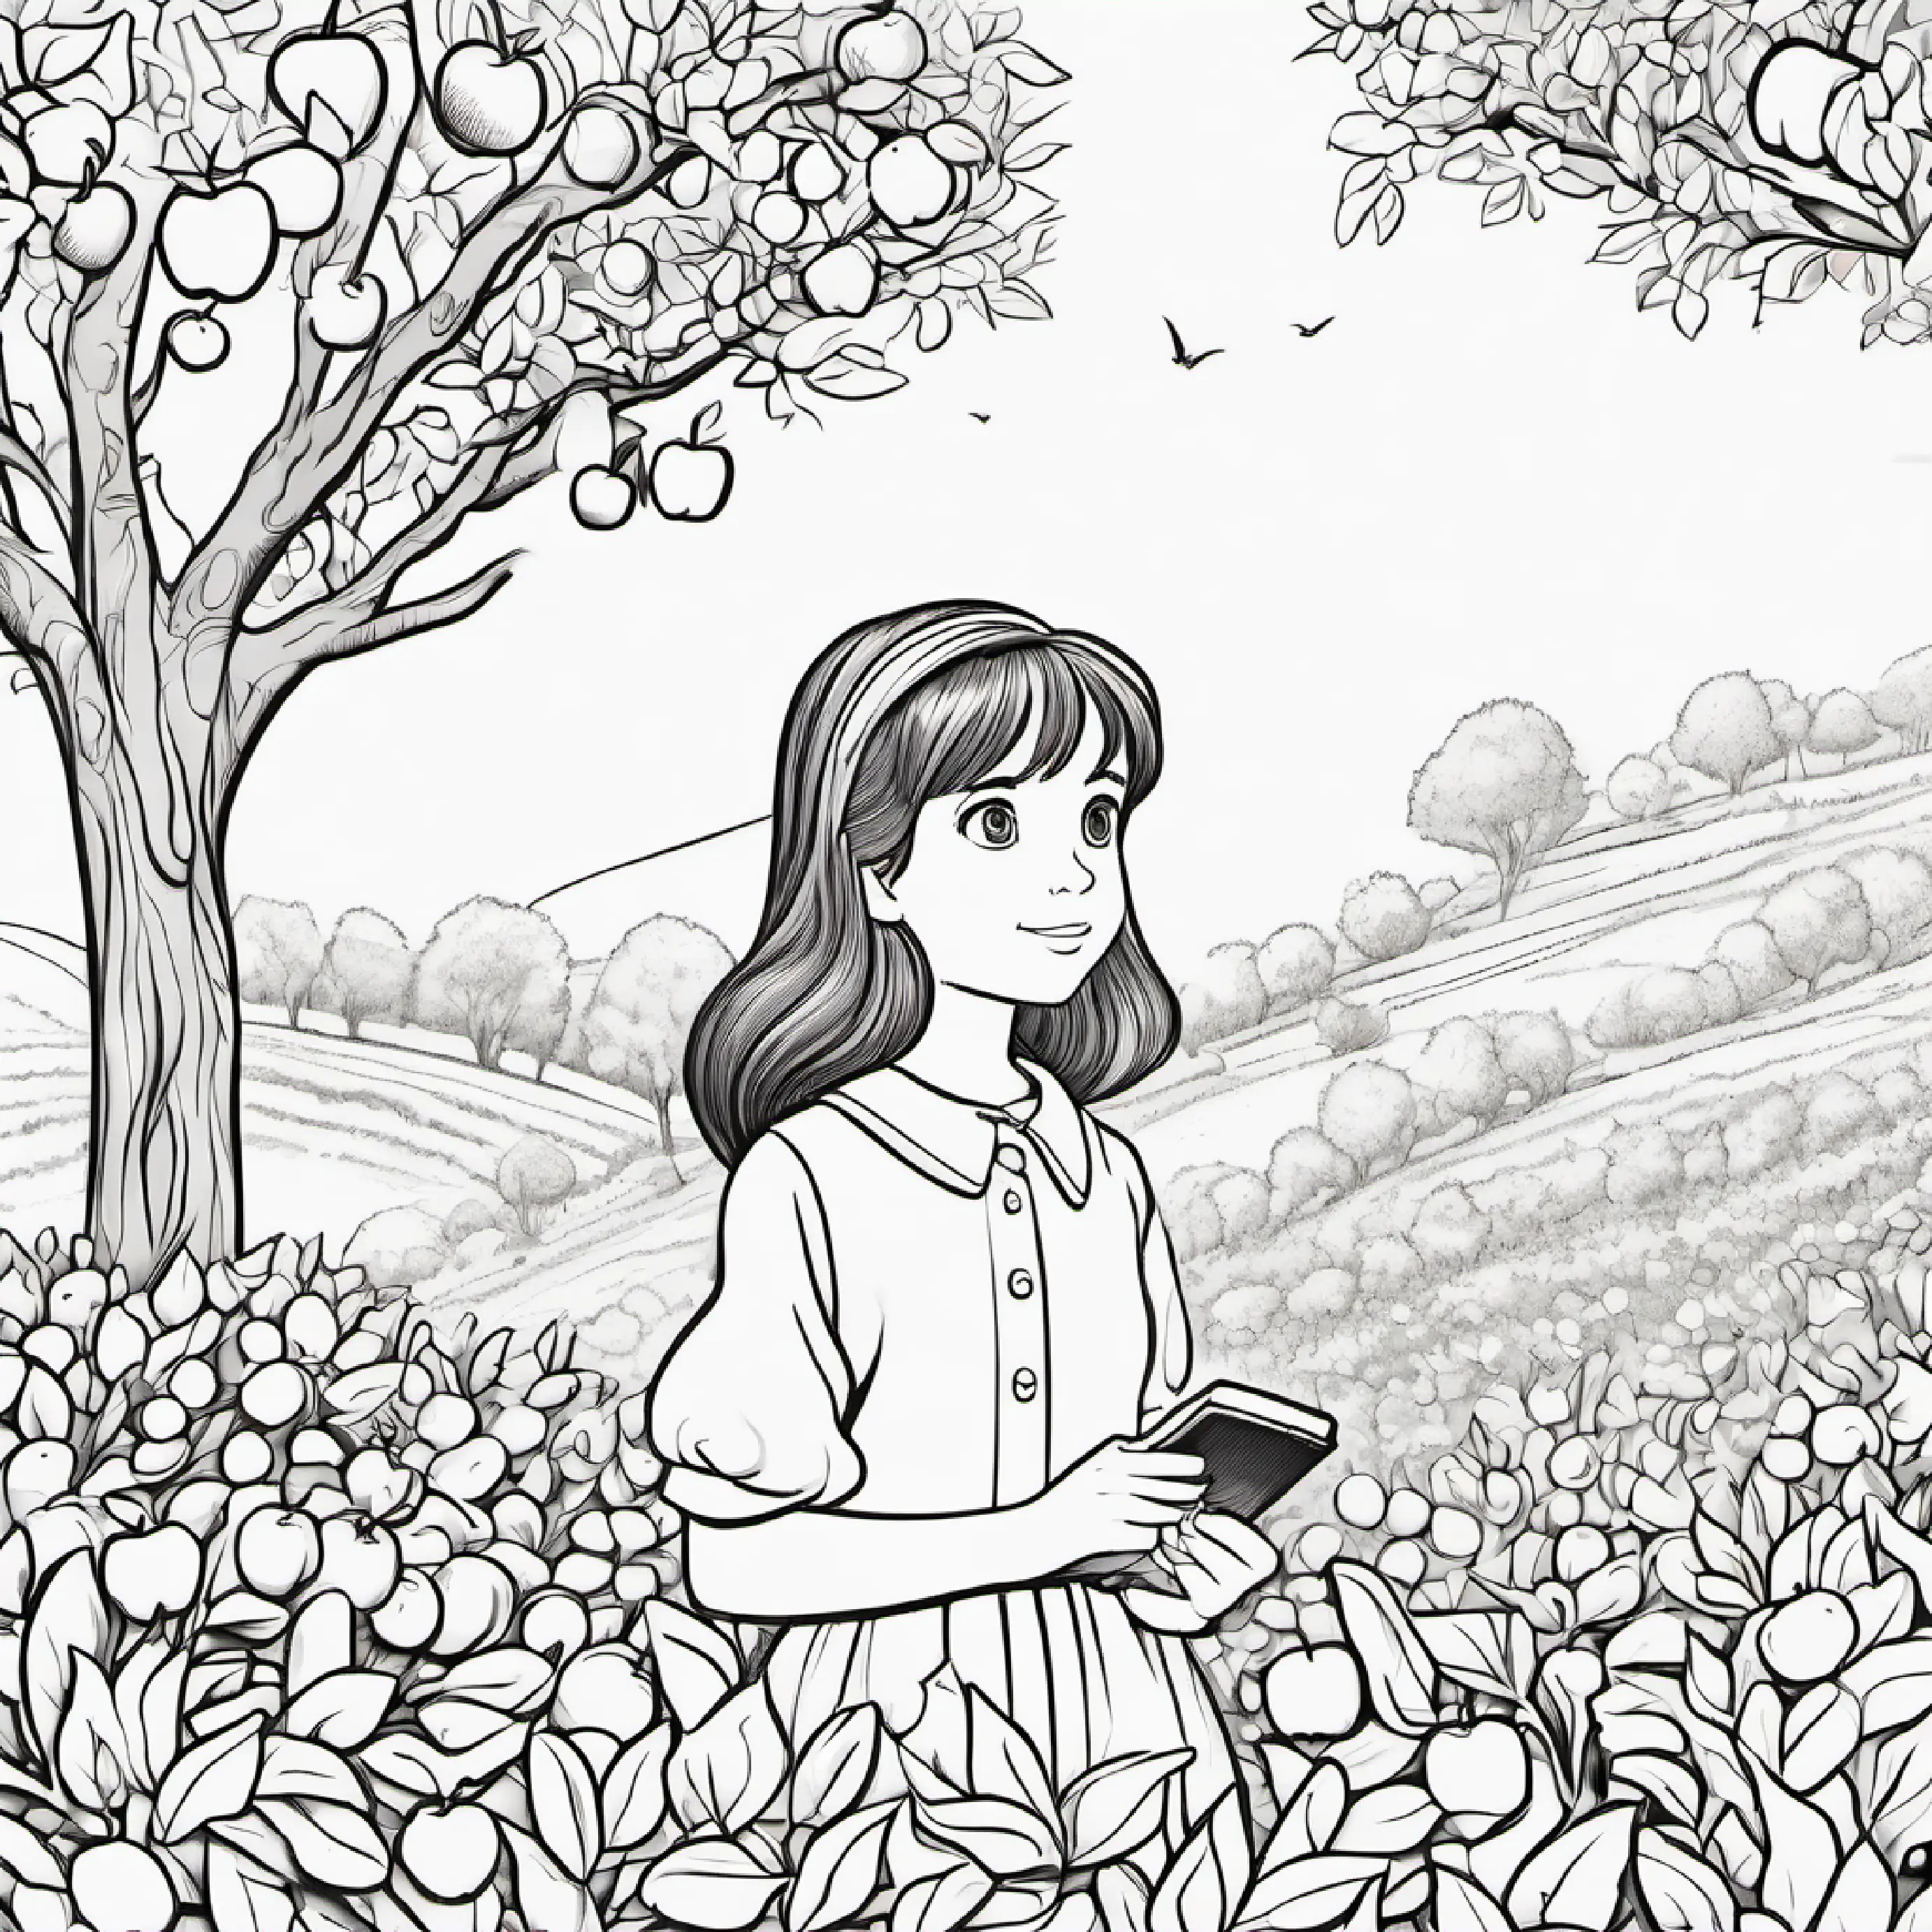 Young girl with brown hair and bright blue eyes meets a speaking apple tree in the orchard.